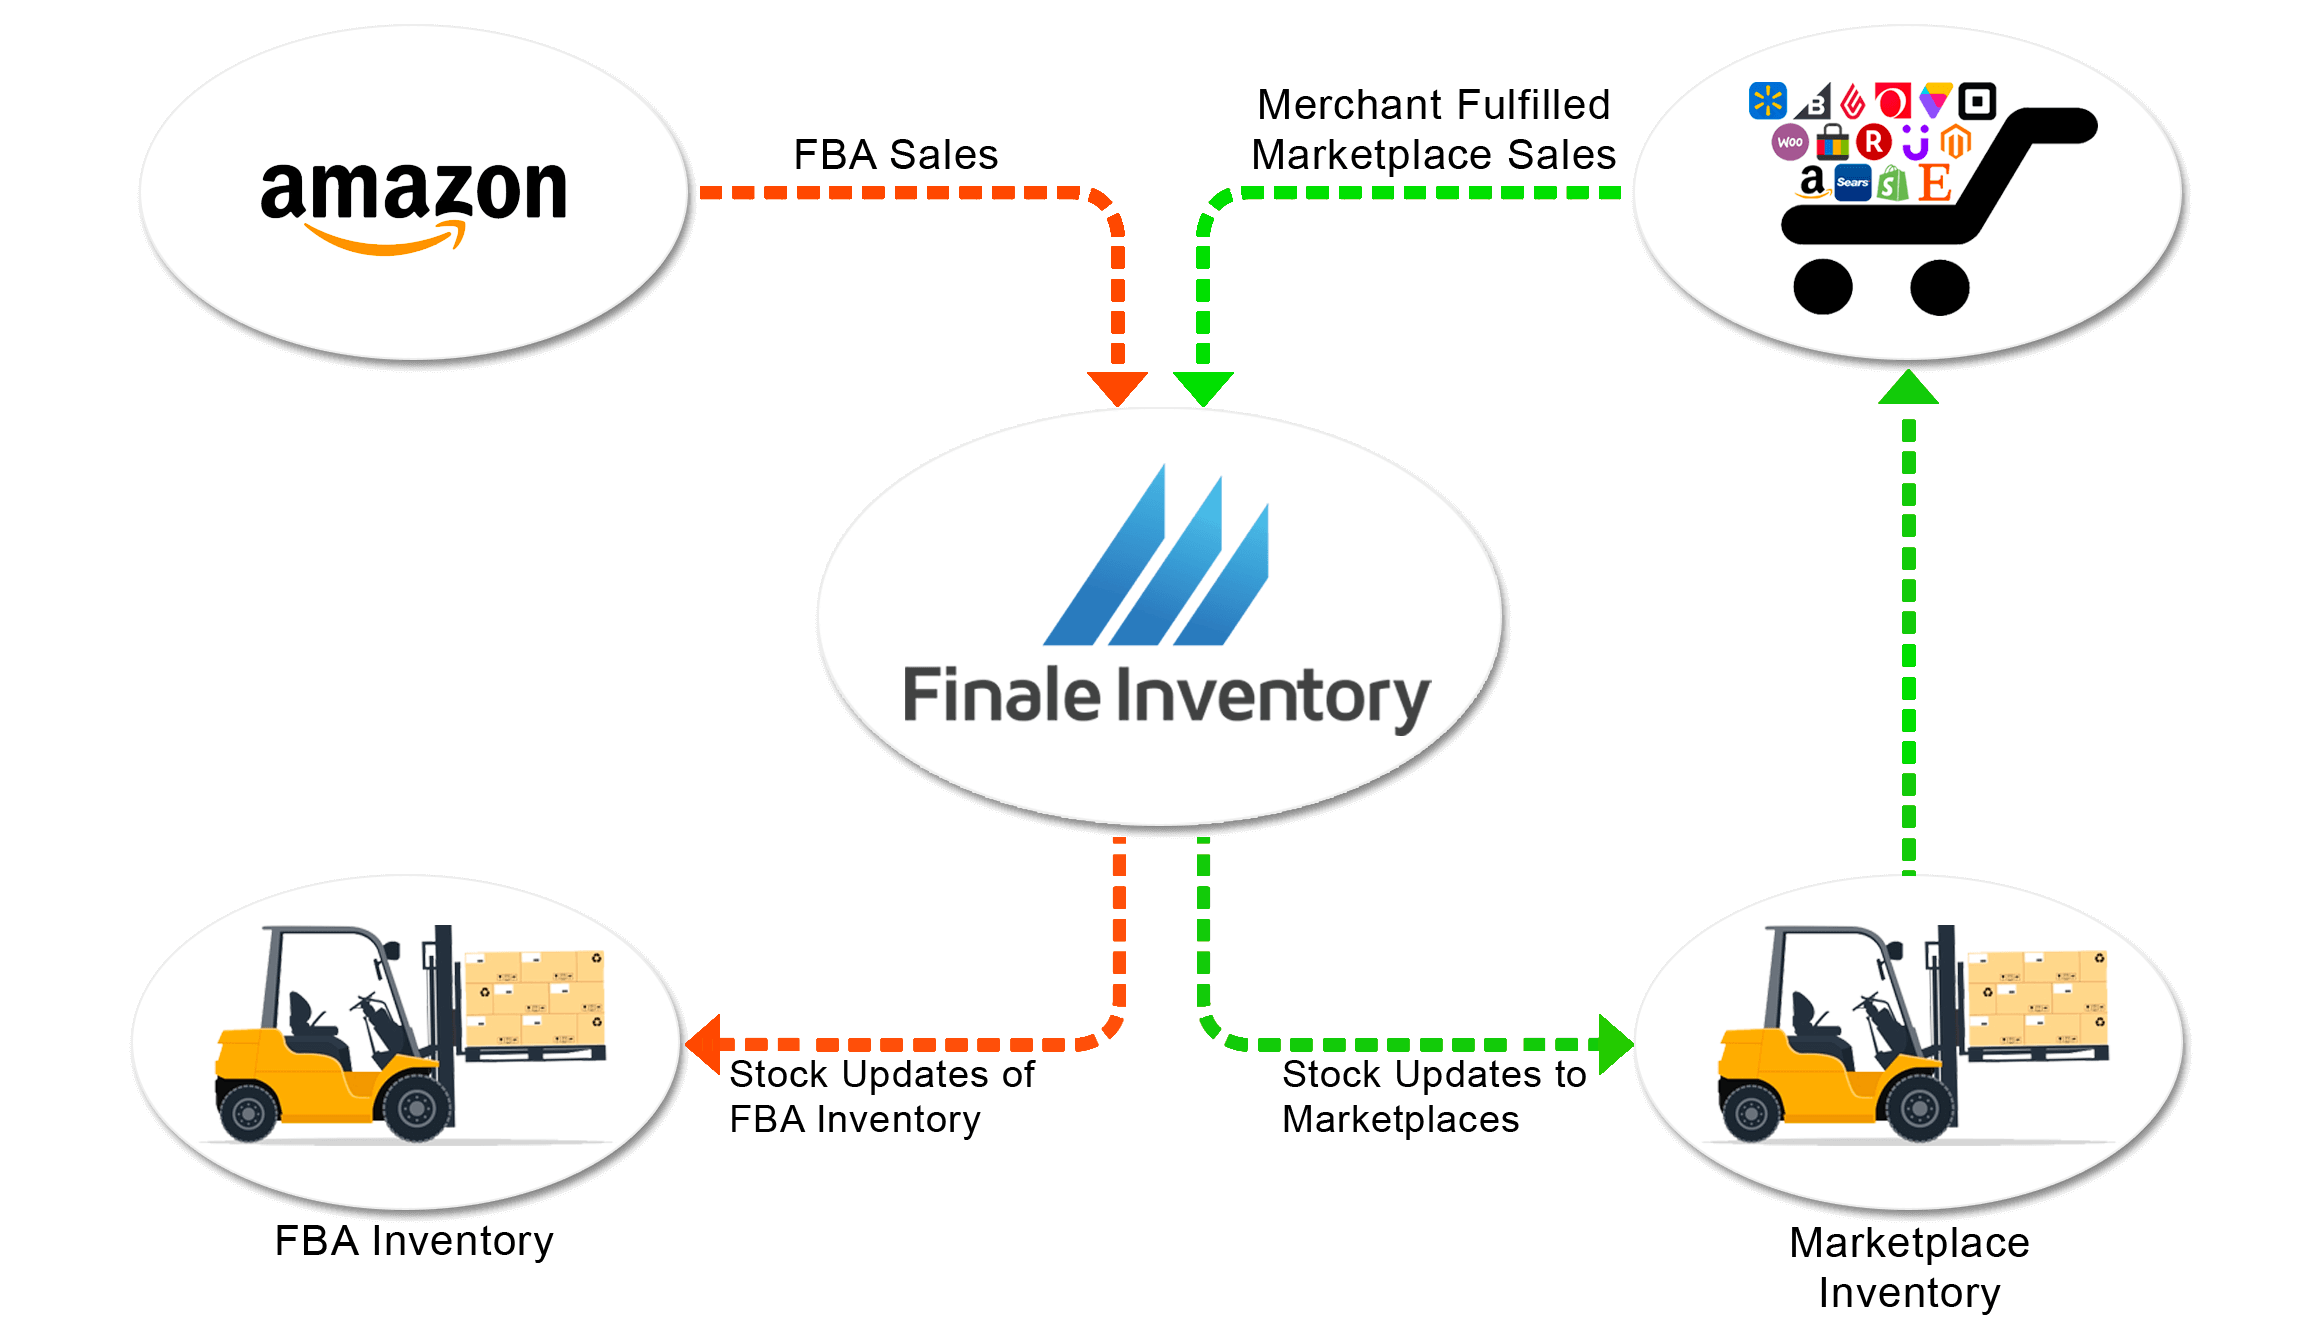 Amazon_FBA_Separate_Inventory_Flow_Chart.png